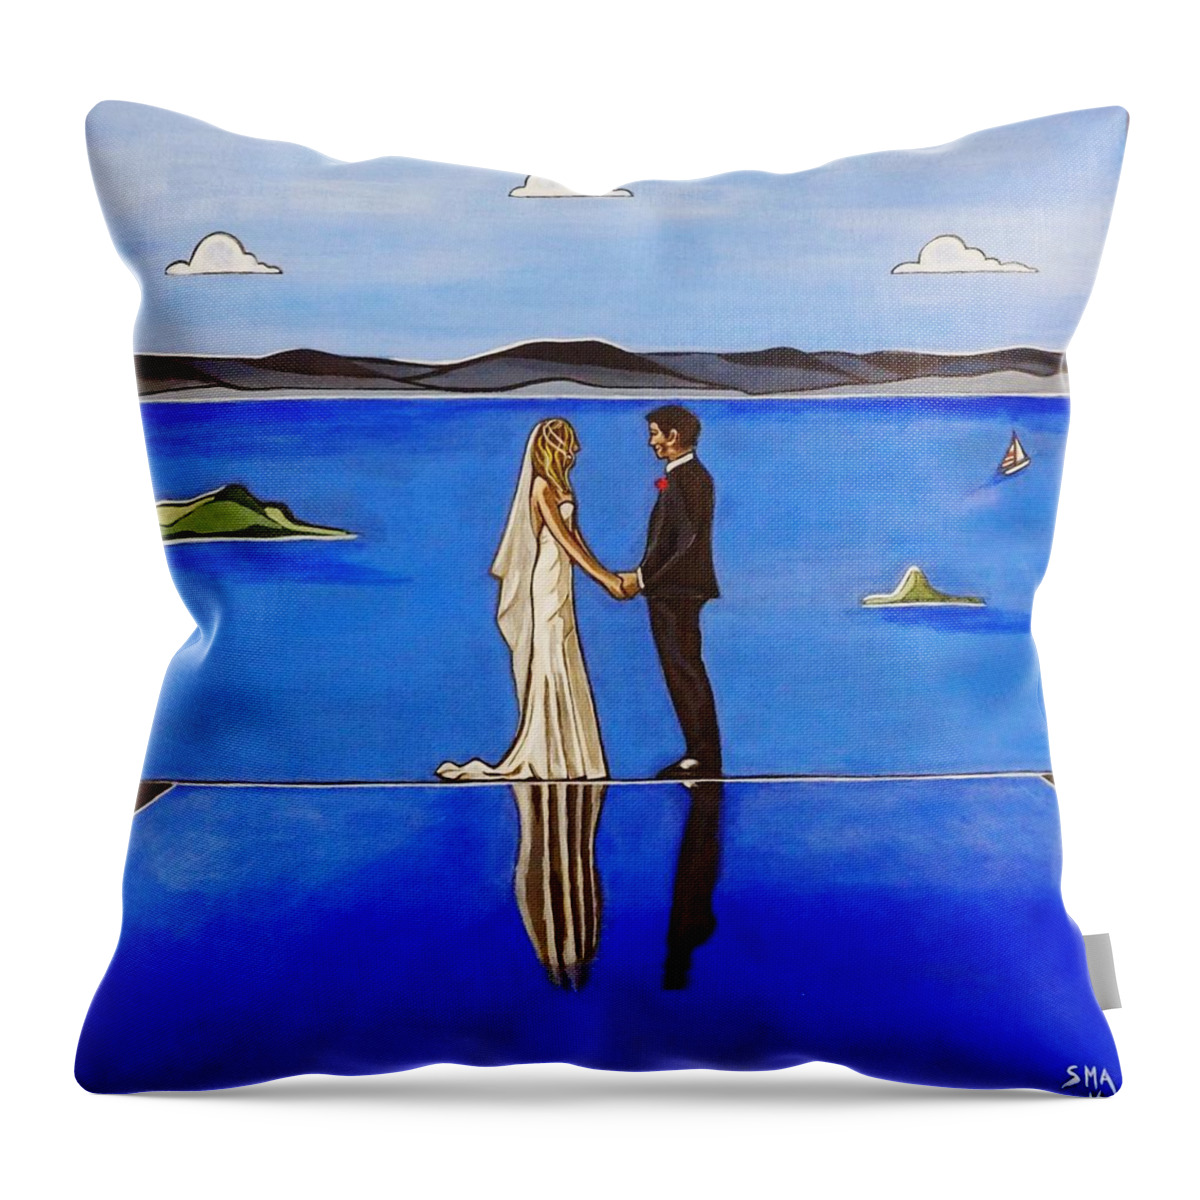  Throw Pillow featuring the painting Waiheke Wedding by Sandra Marie Adams by Sandra Marie Adams